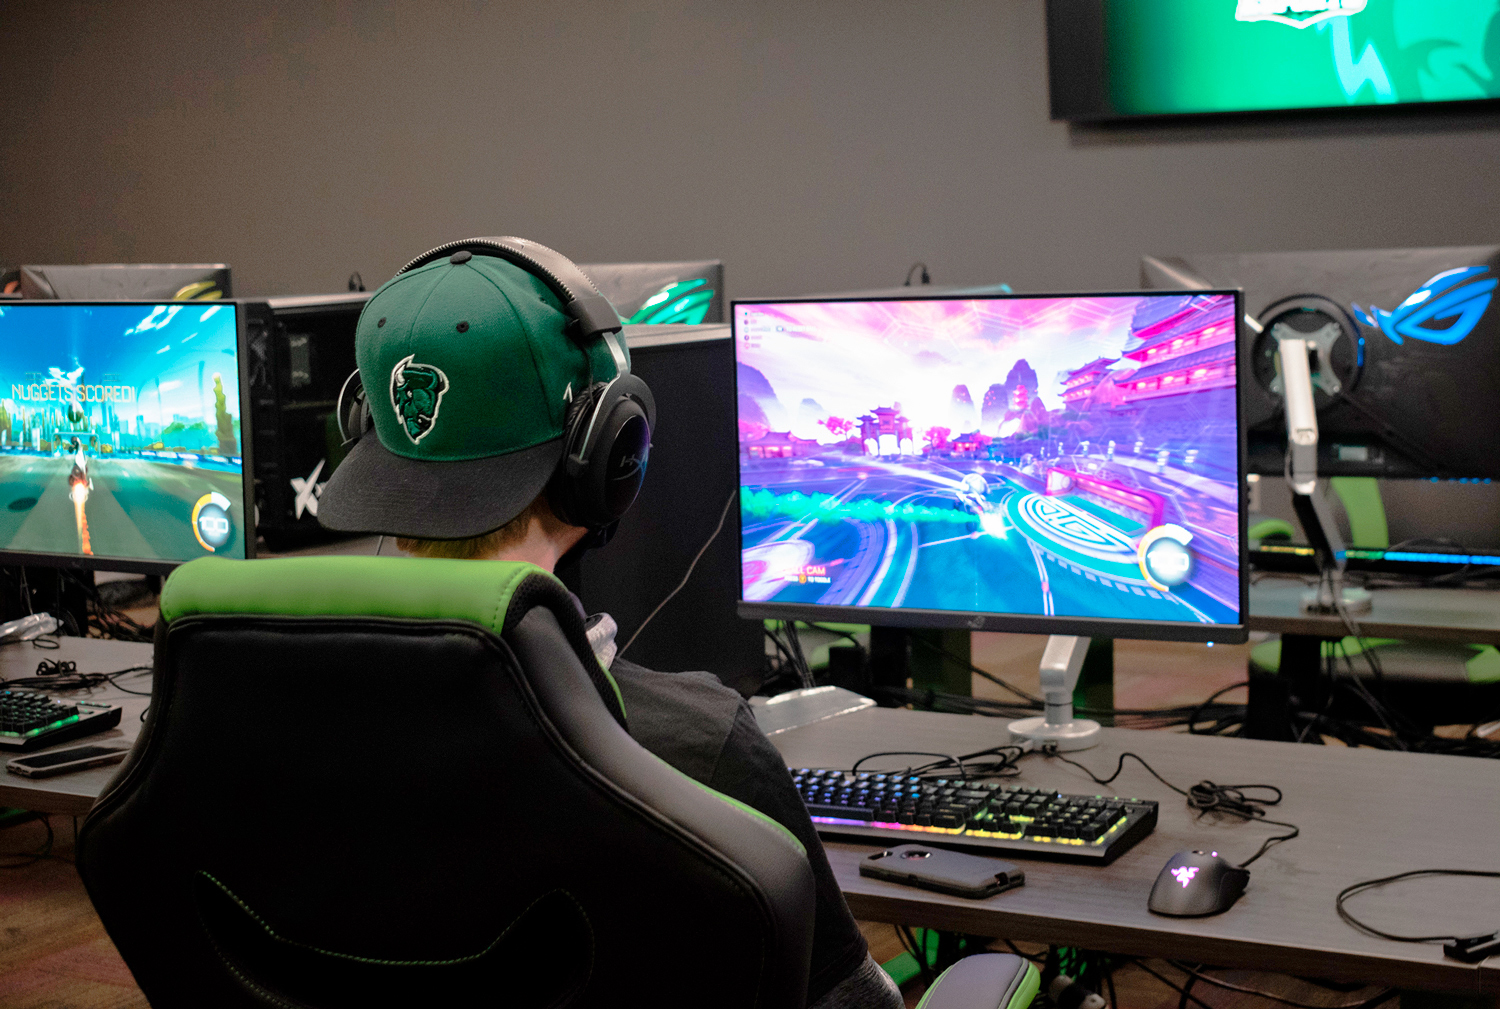 The esports training room includes 16 high-powered gaming stations with 27" HDR gaming monitors. Signals from any gaming station can be routed to the wall-mounted large screen displays and the SMP 111 streaming media processor.